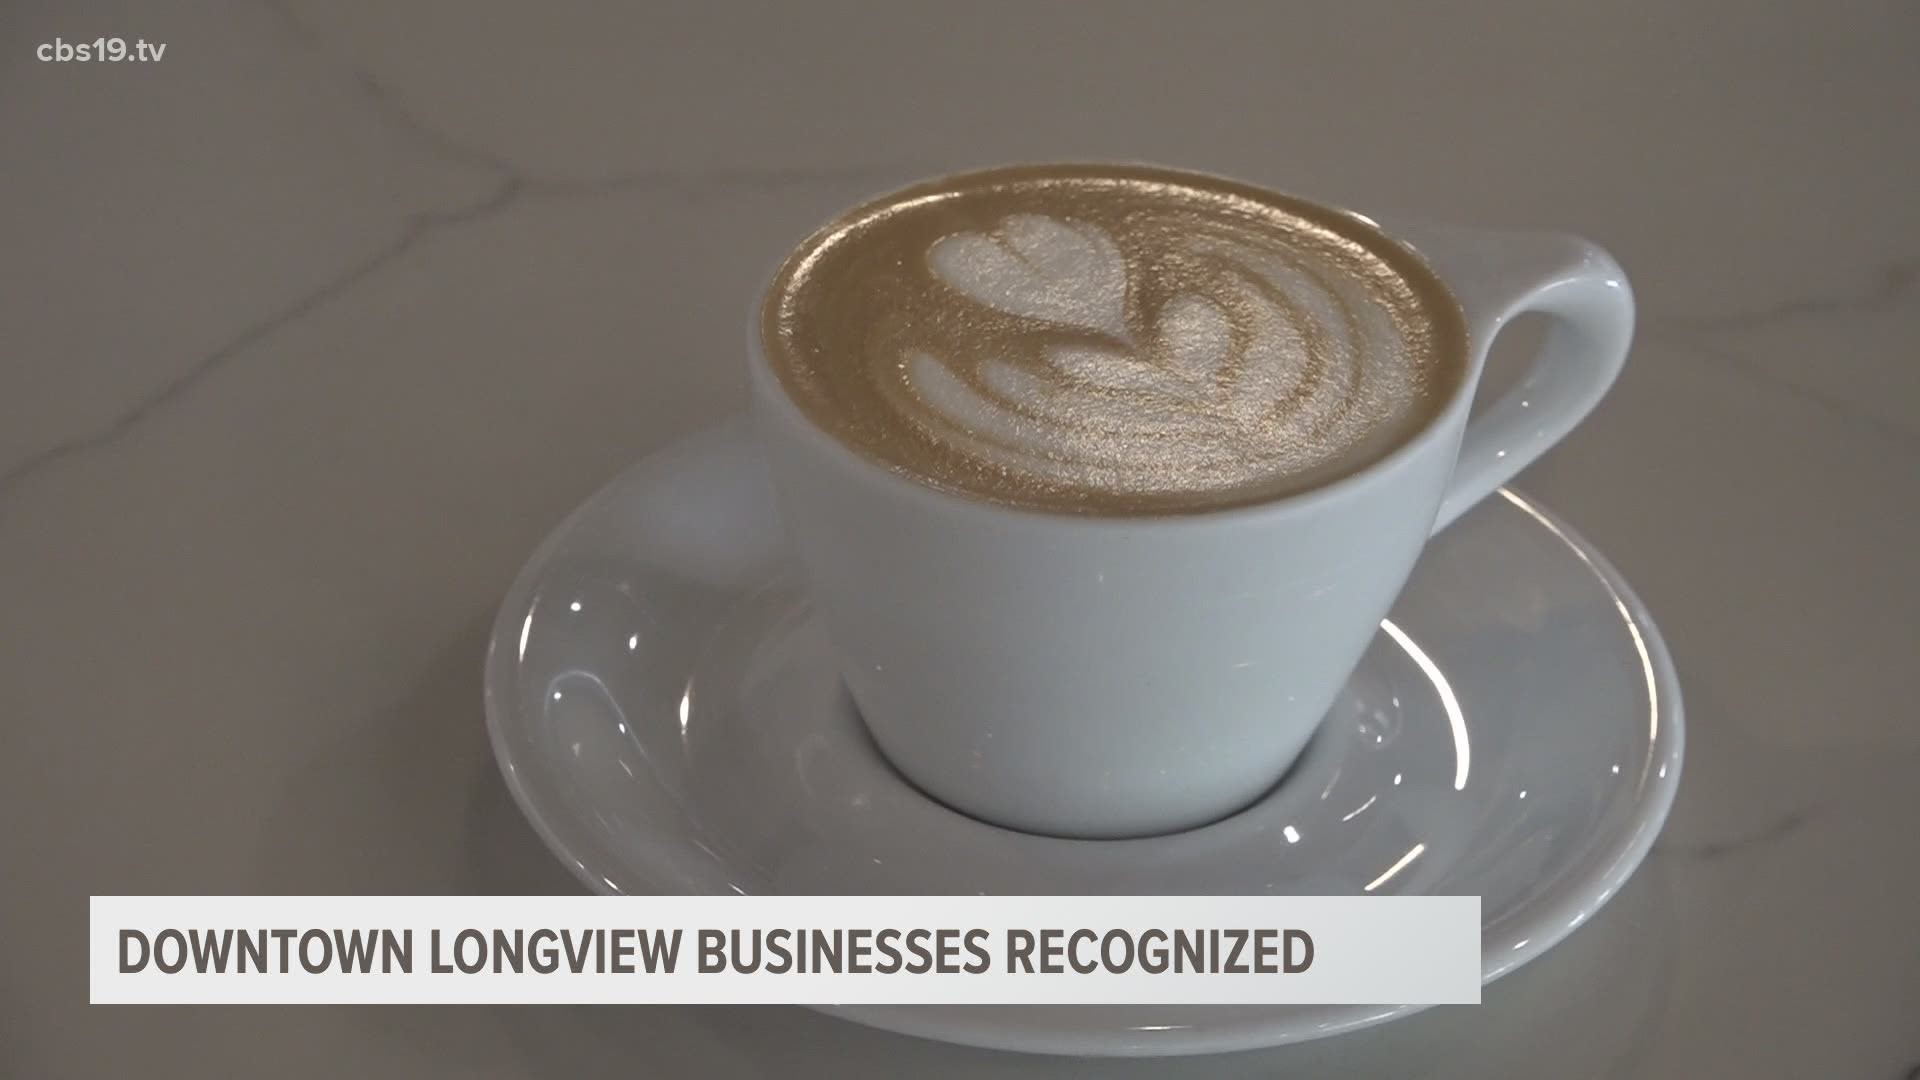 Downtown Longview businesses receive recognition as finalist in the Texas Downtown Association's 2020 President's Awards Program.